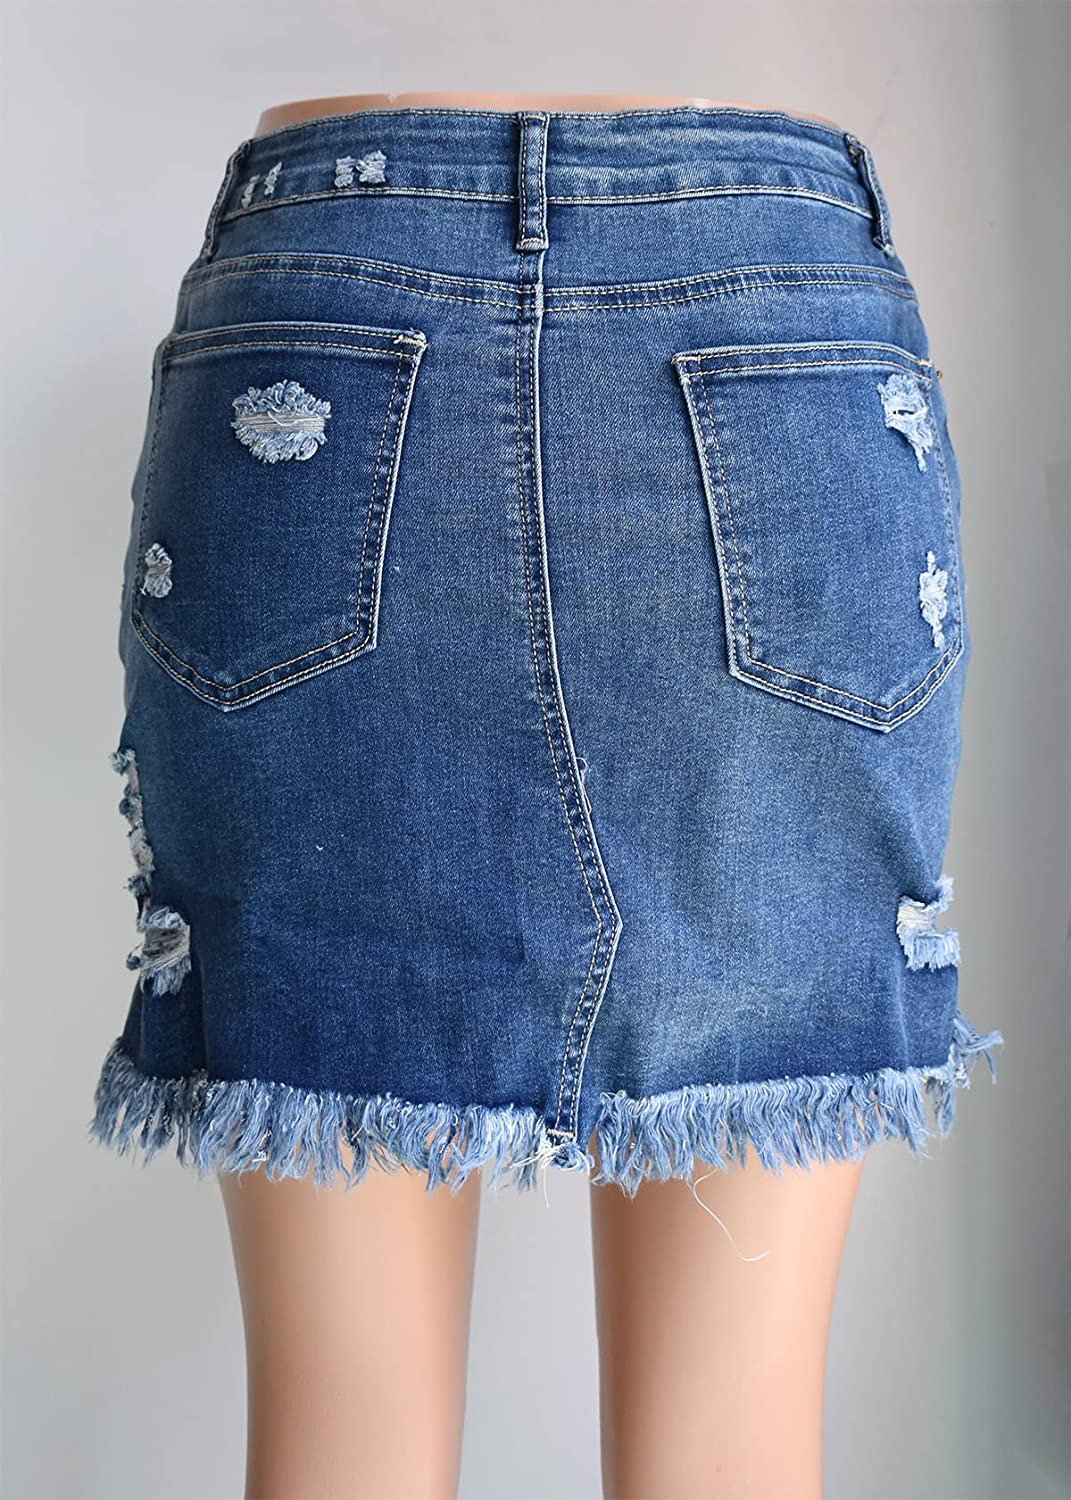 Jean Skirt for Women Stretch Denim Ripped Mini Short Casual A Line Above Knee Length